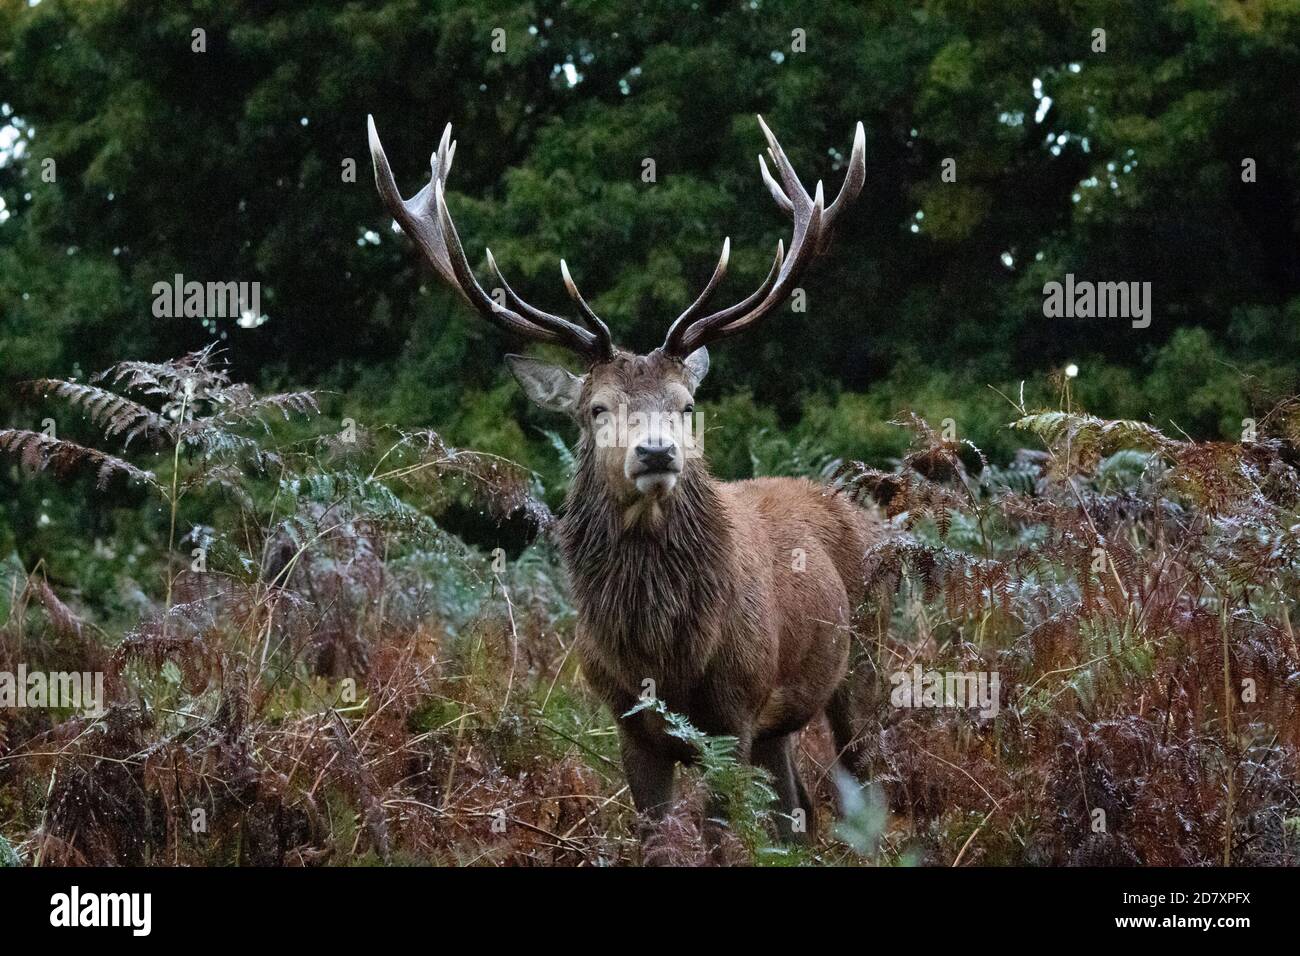 A soaked red deer stag pauses in the dripping bracken on a rainy morning in Bushy Park, West London Stock Photo